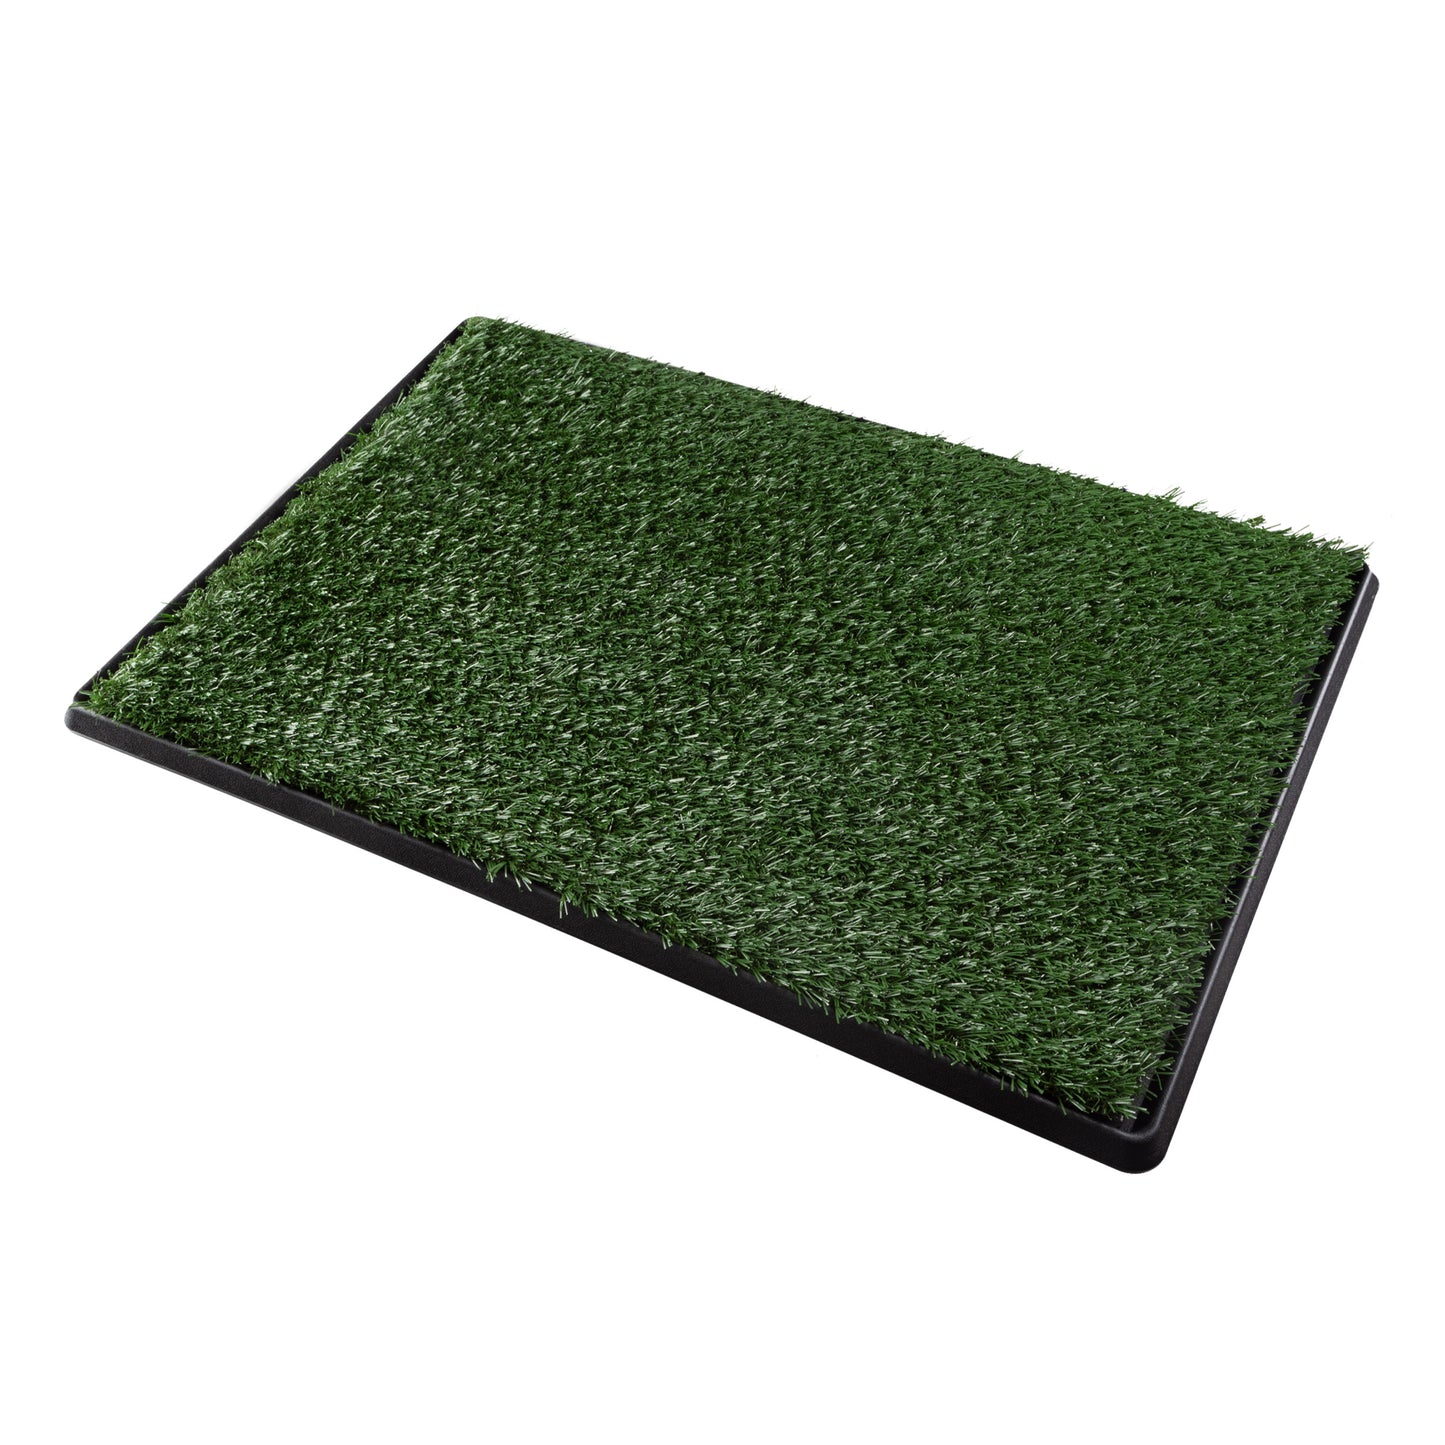 Reusable Grass Puppy Pad with Tray